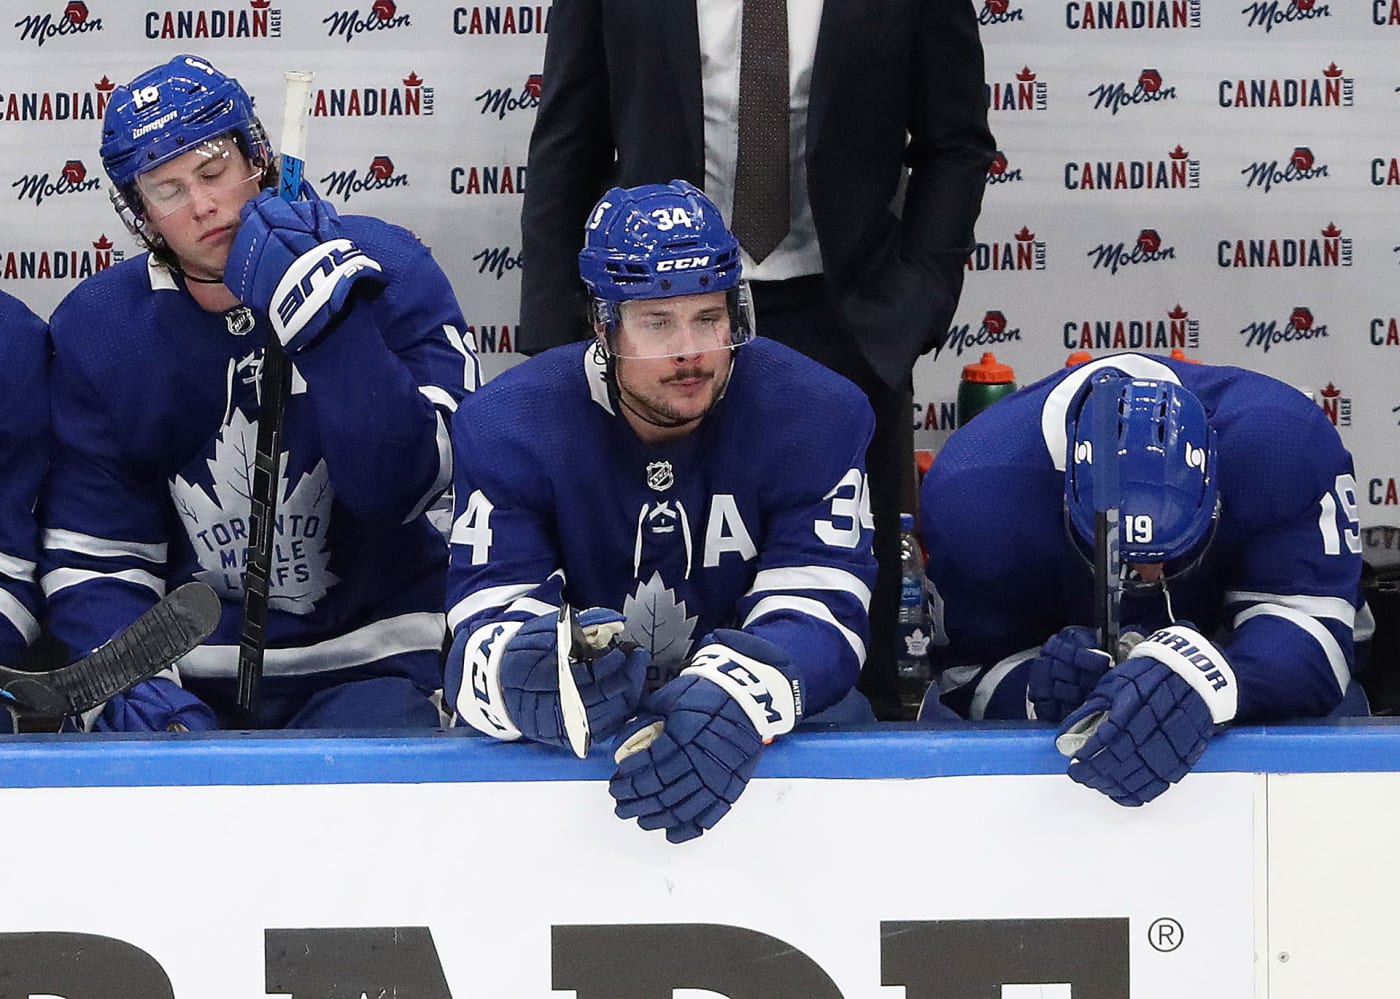 Toronto Maple Leafs lose out again in the playoffs